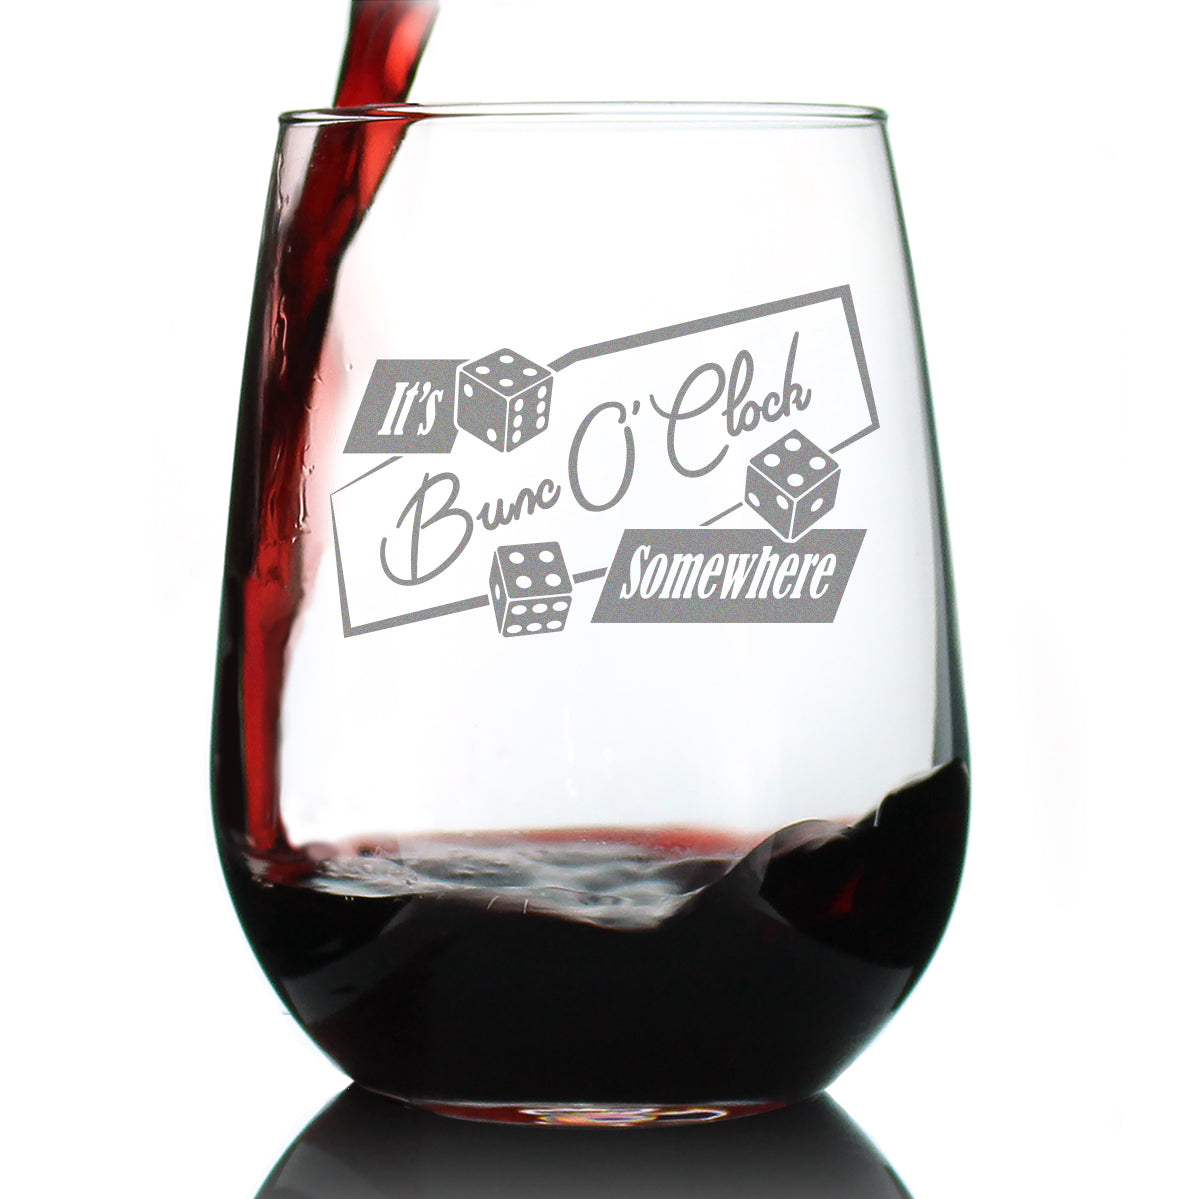 BuncO &#39;Clock Somewhere Stemless Wine Glass - Bunco Decor and Bunco Gifts for Women - Large 17 Oz Glasses